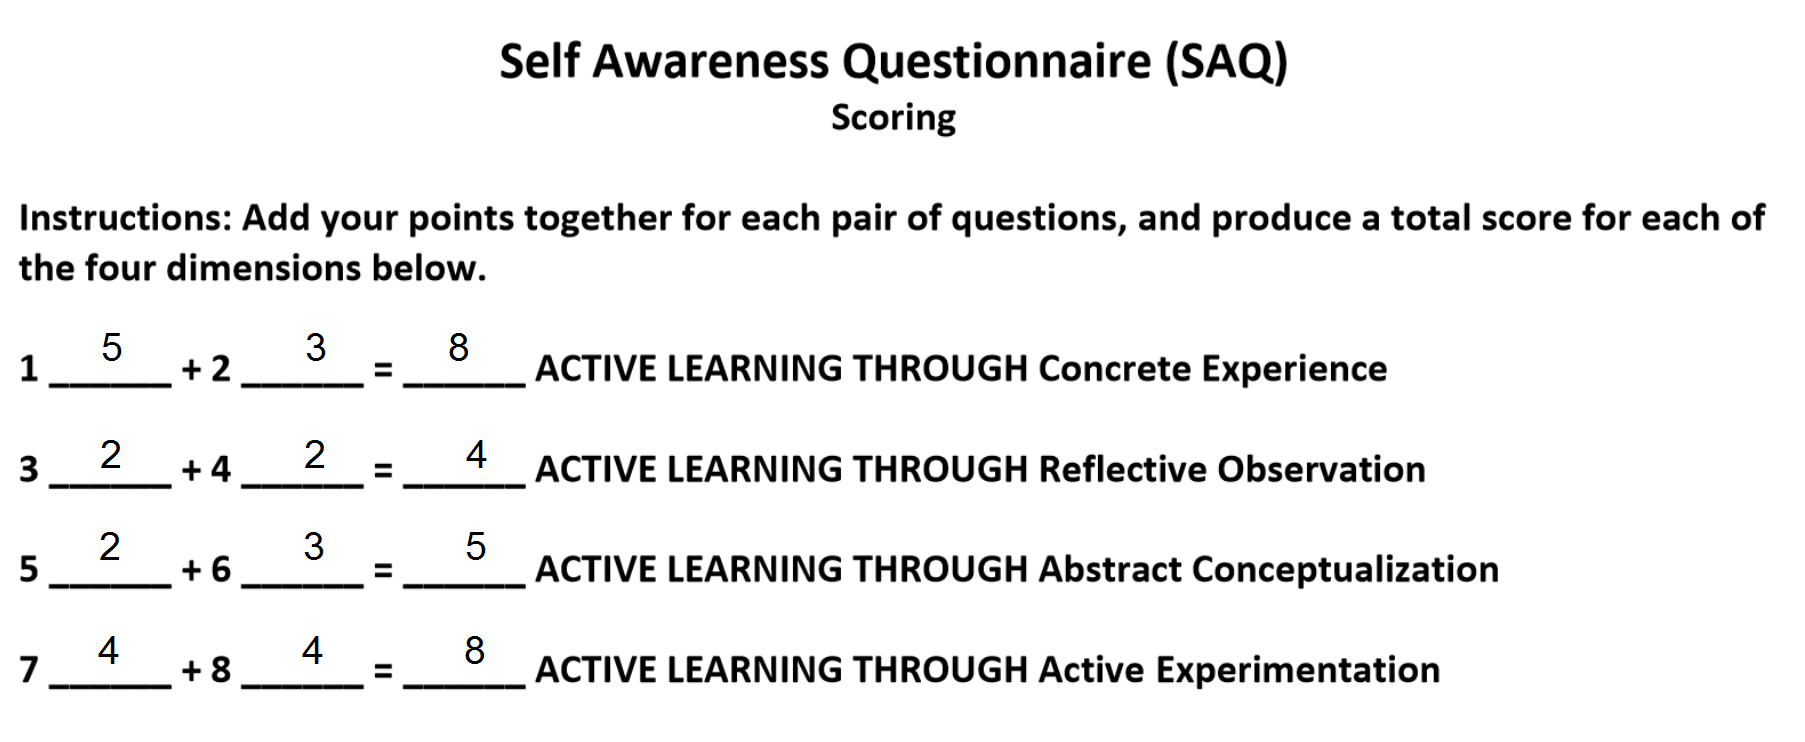 Self-awareness questionnaire results